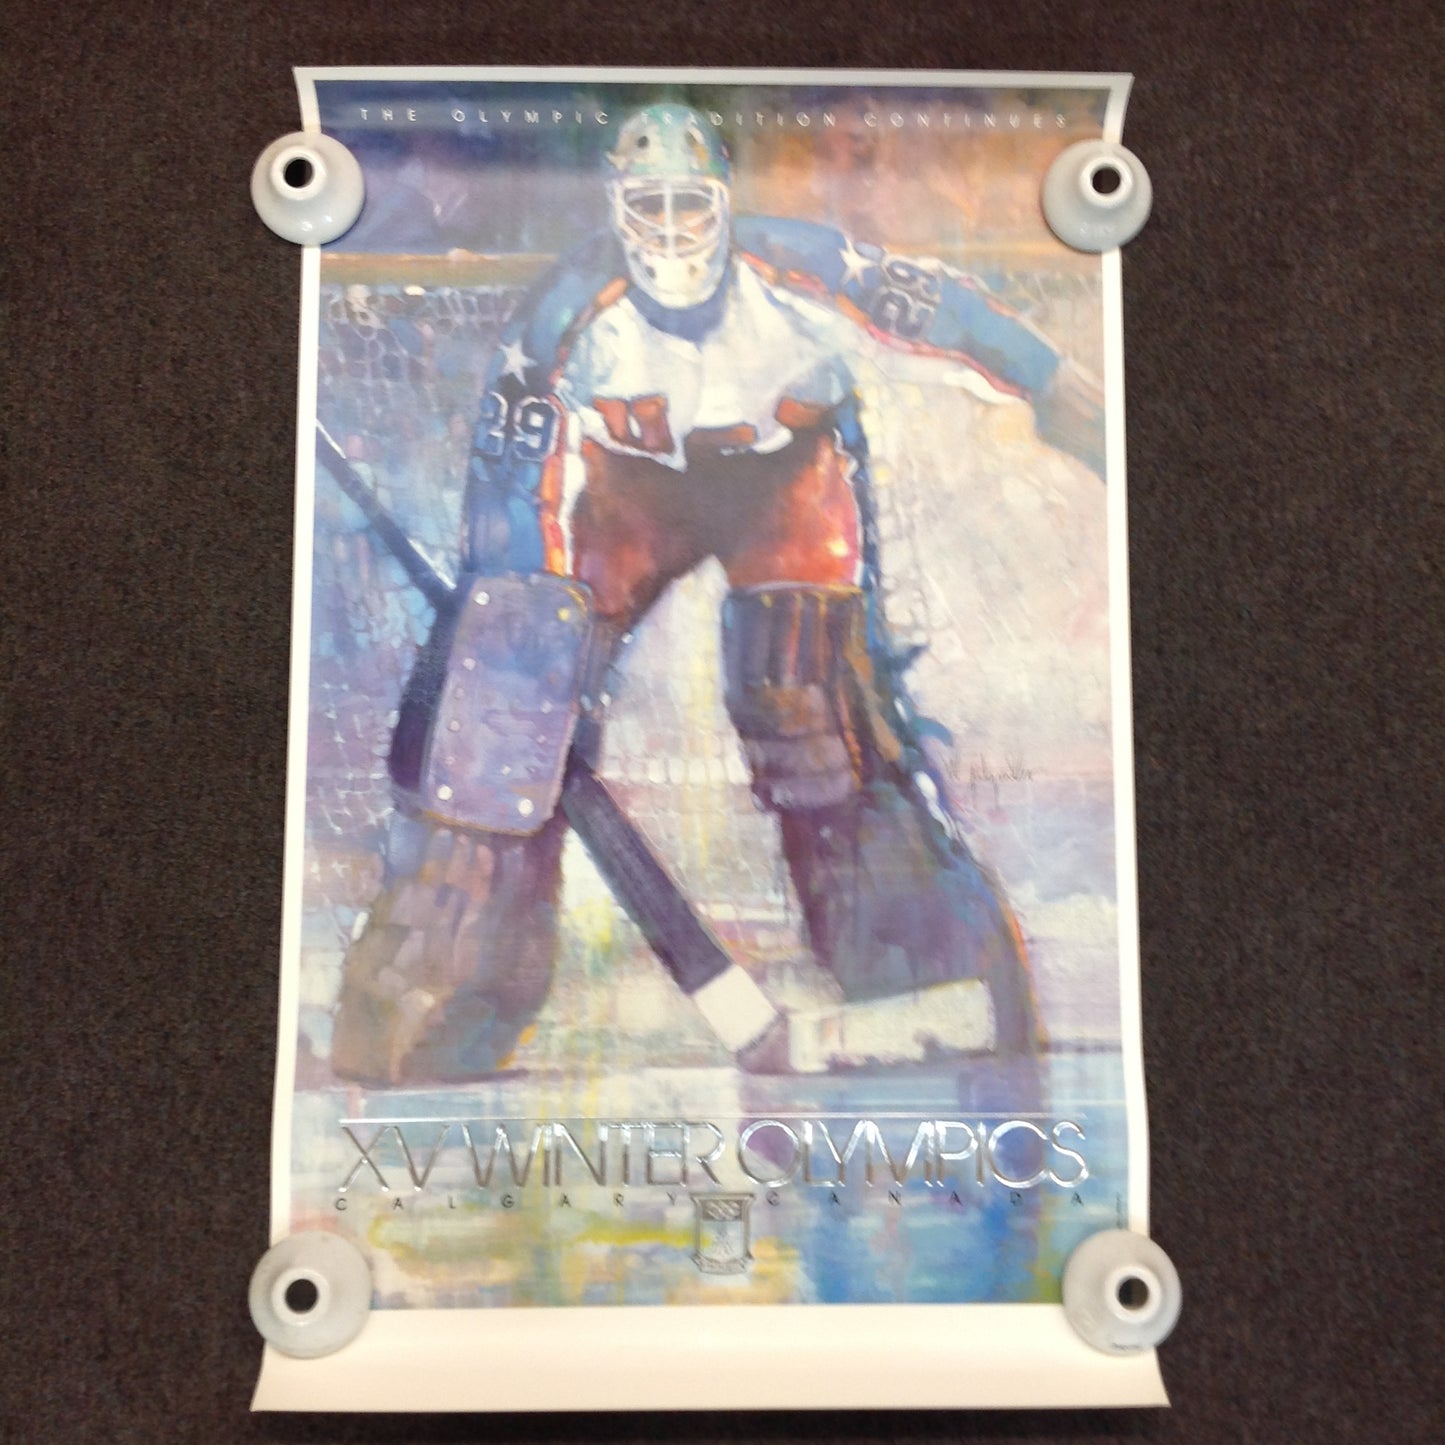 Vintage 1987 ABC Calgary 88 XV Winter Olympics The Tradition Continues Ice Hockey Hockey Player Goalie  Embossed